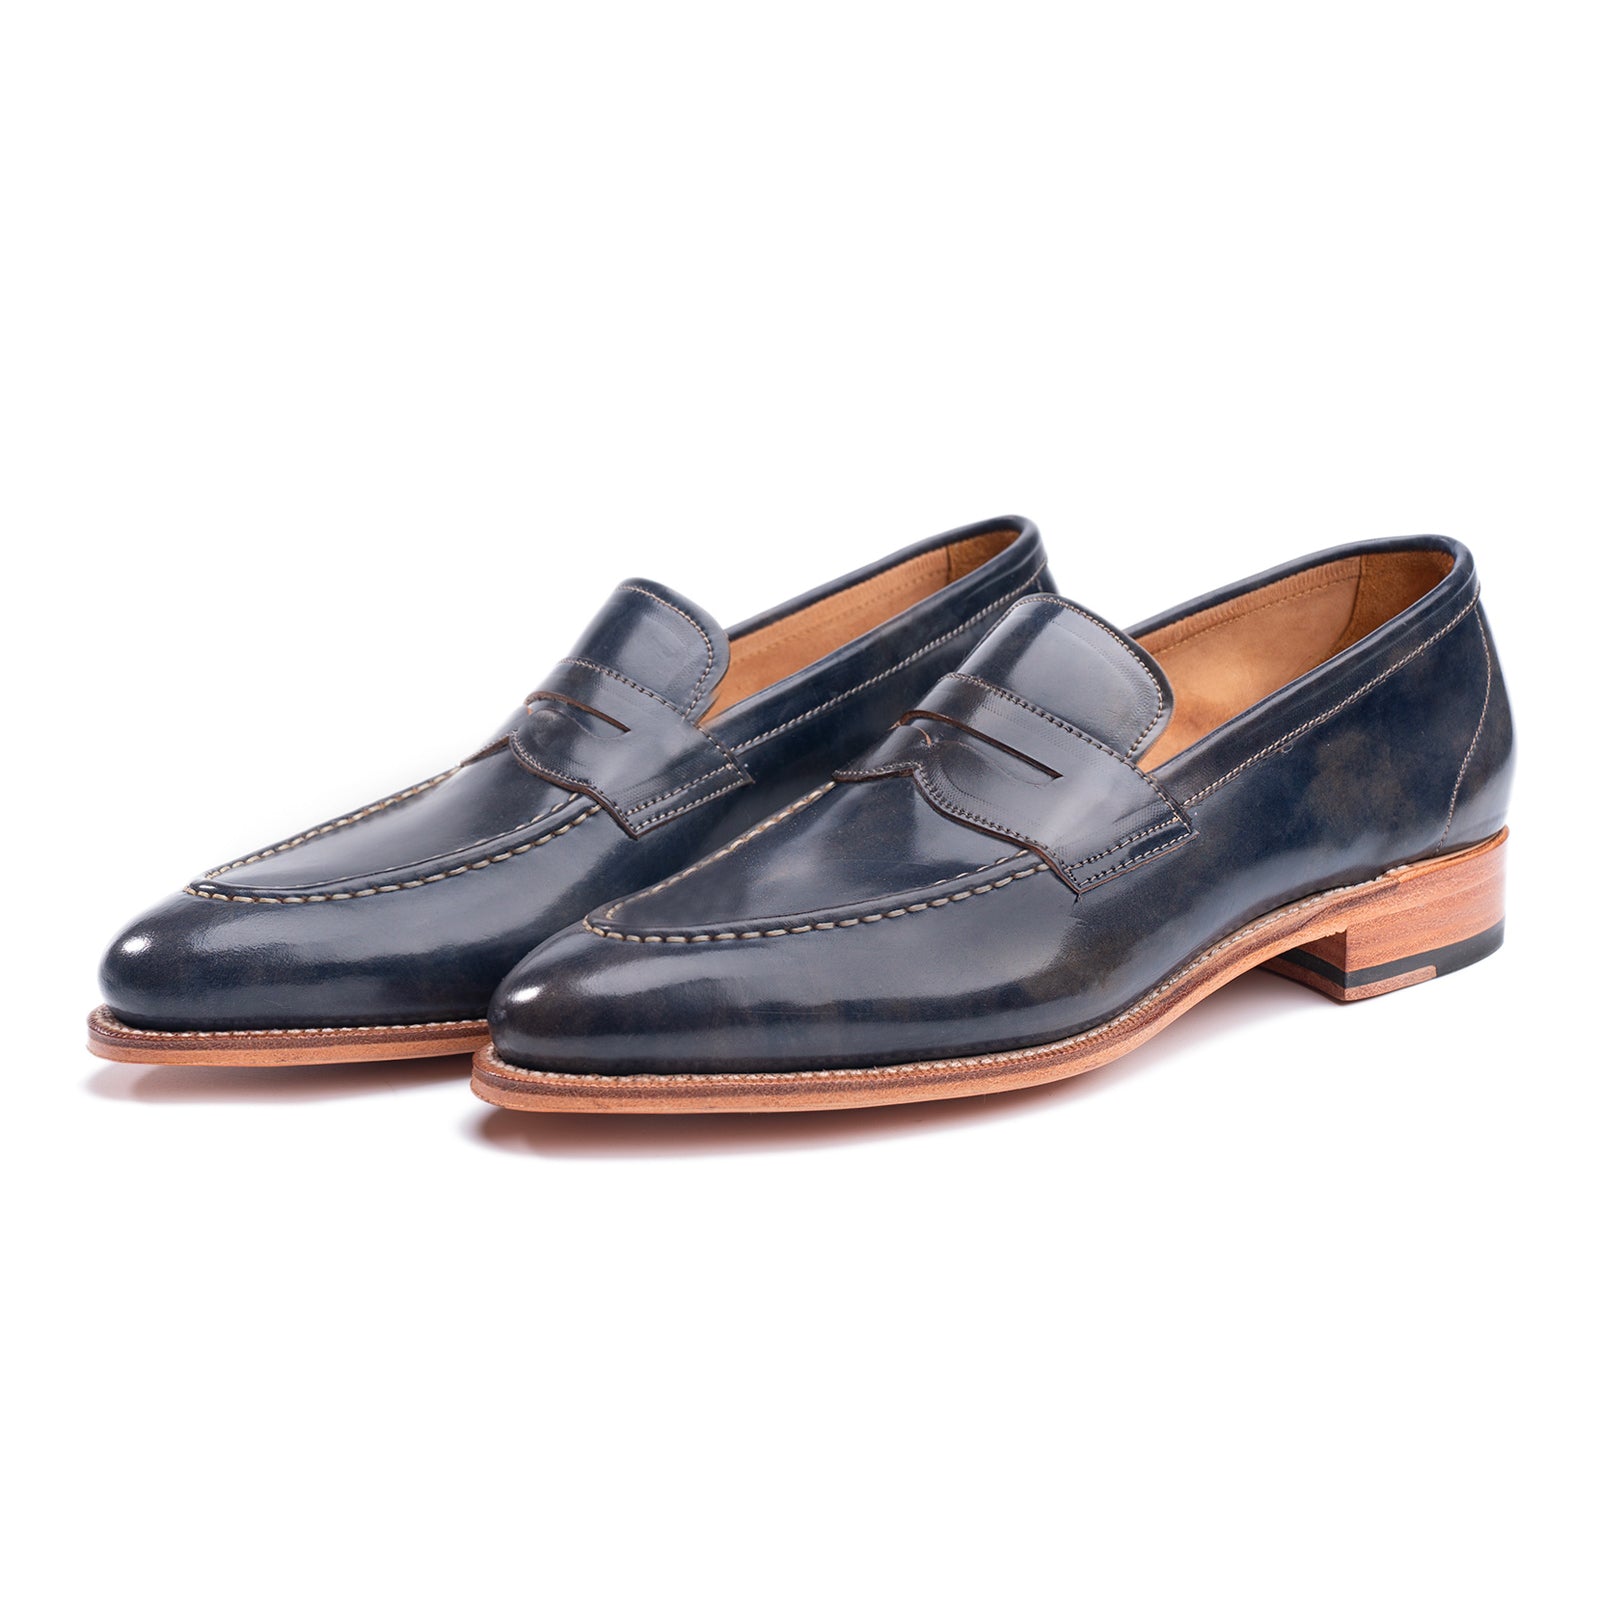 114284 - NAVY MUSEUM SHELL CORDOVAN - G – Meermin Shoes